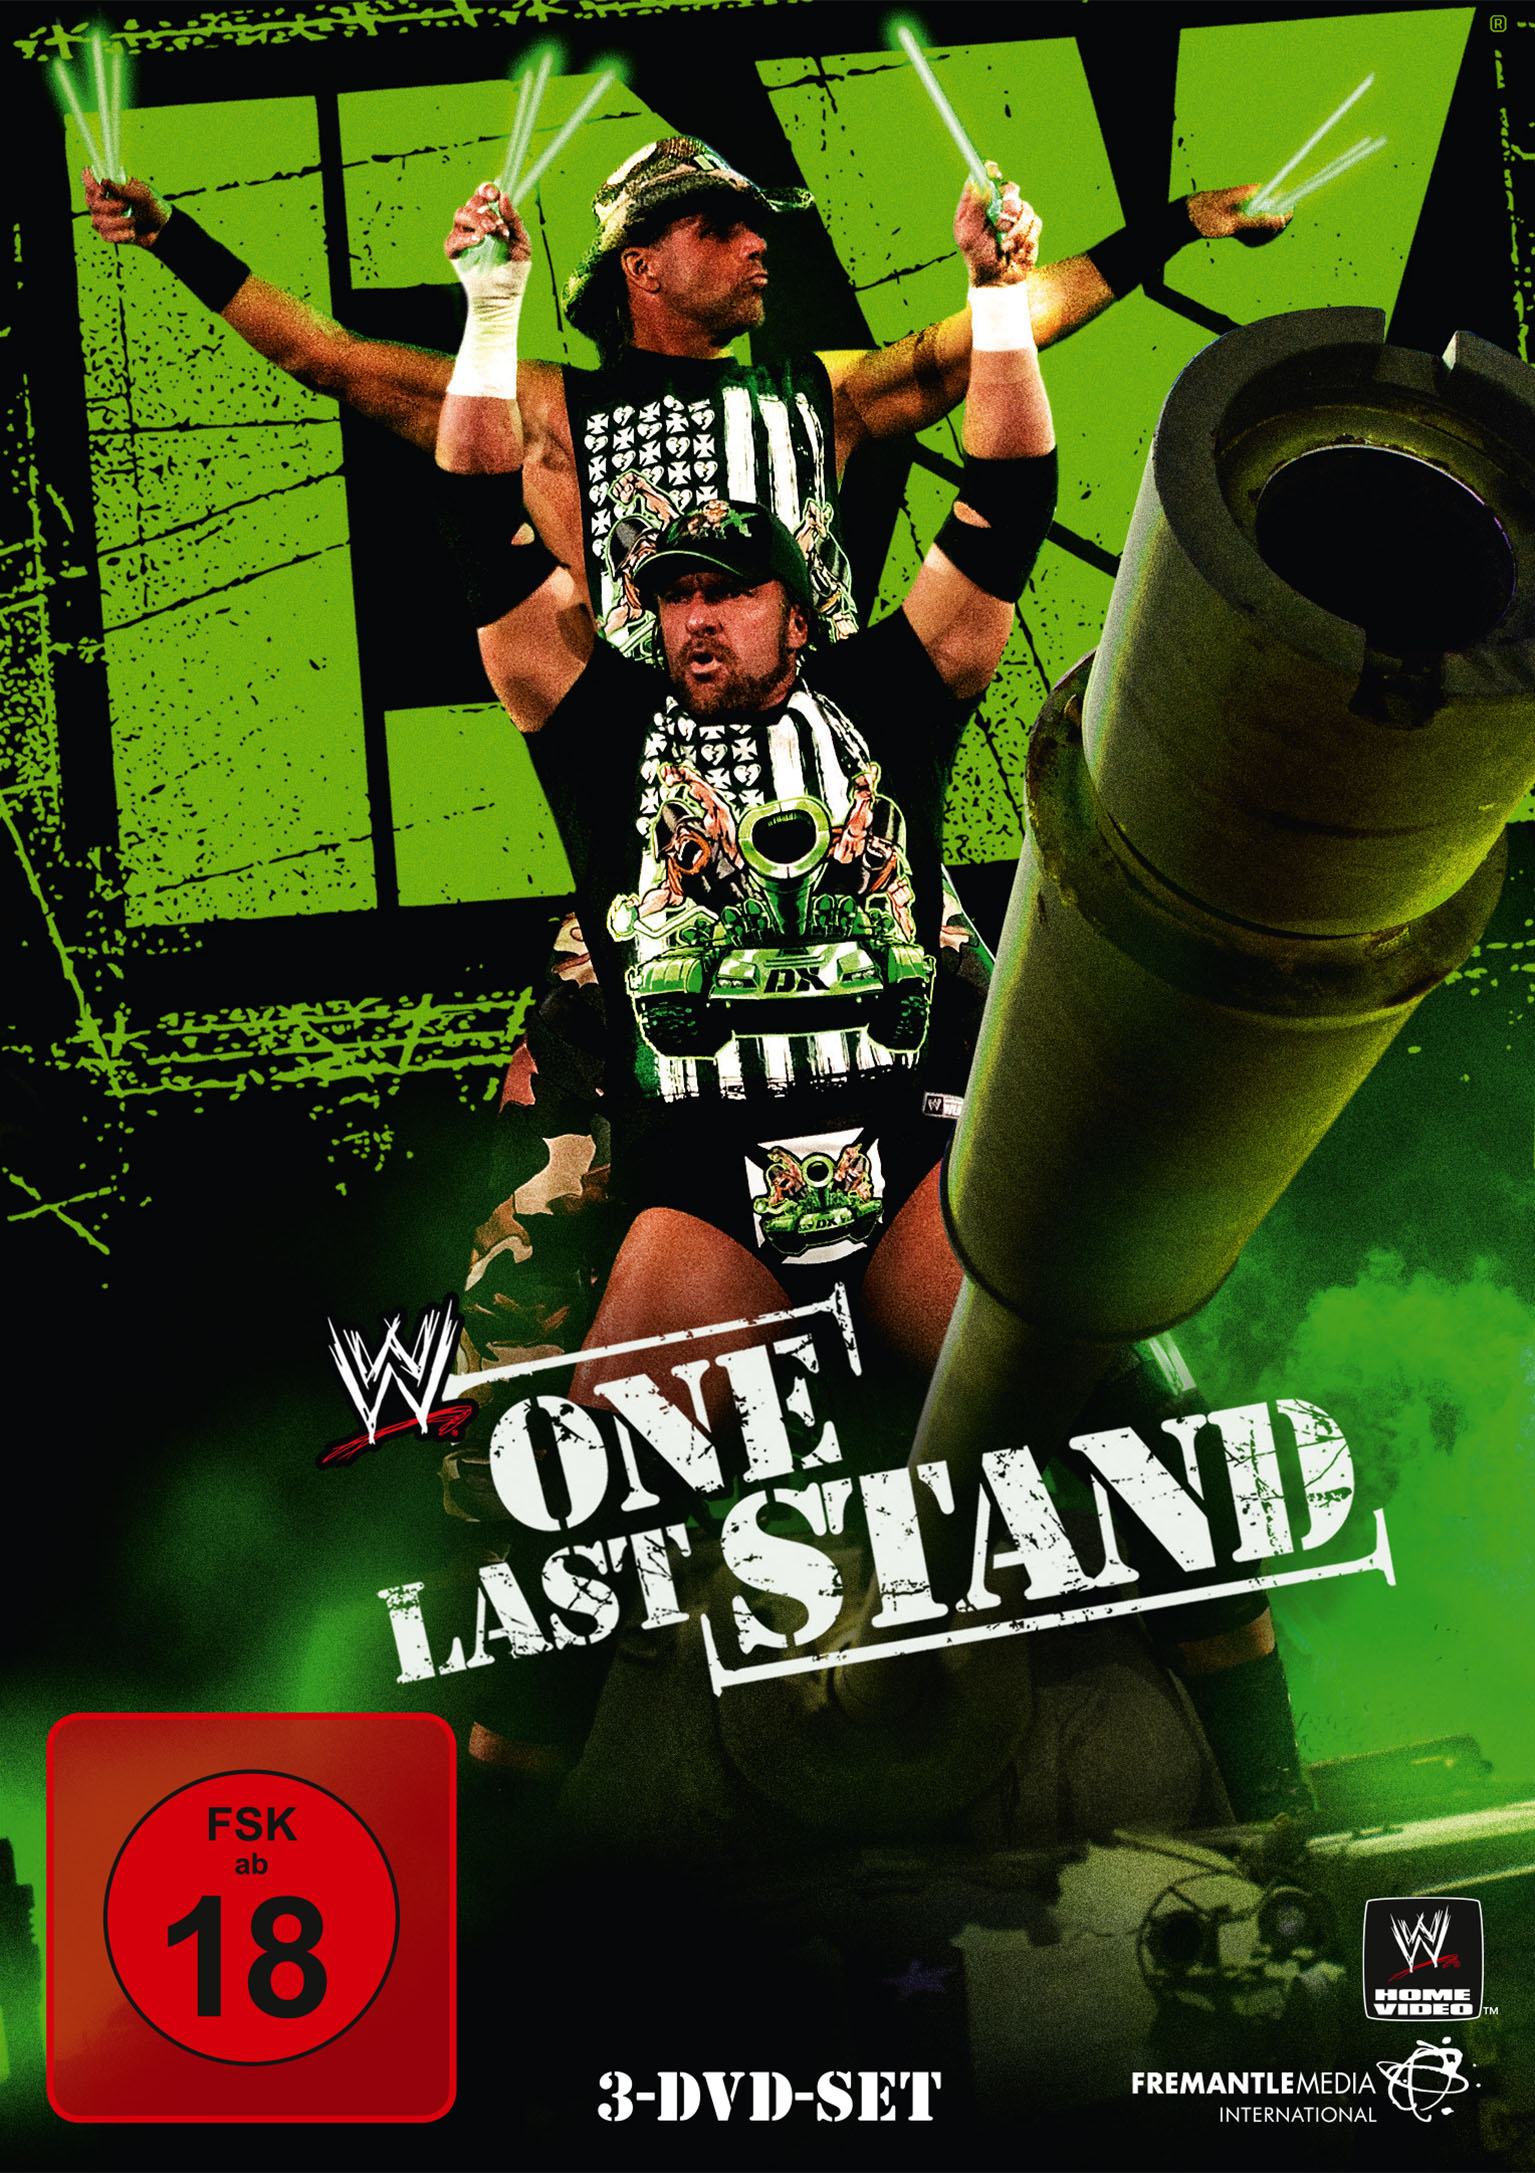 Last DX DVD - Stand One